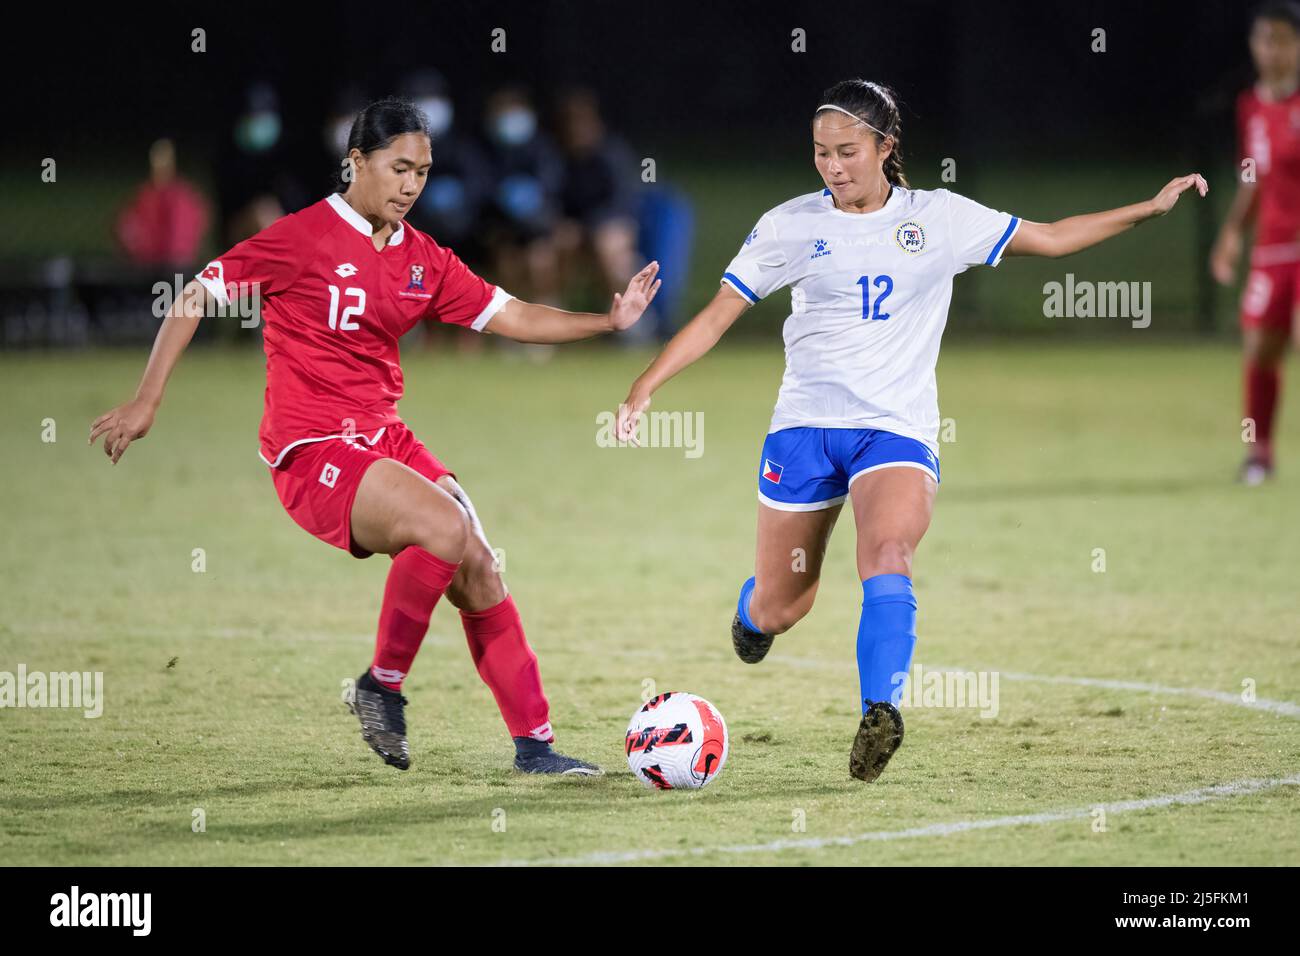 Blacktown, Australia. 22nd Apr, 2022. Lositika Feke (L) of the Tonga Women's Team and Kaya Hawkinson (R) of the Philippine National Women's Team seen during the Friendly match between Philippine National Women's Team and Tonga at the Wanderers Football Park in Blacktown. (Final score; Philippines 16:0 Tonga). Credit: SOPA Images Limited/Alamy Live News Stock Photo